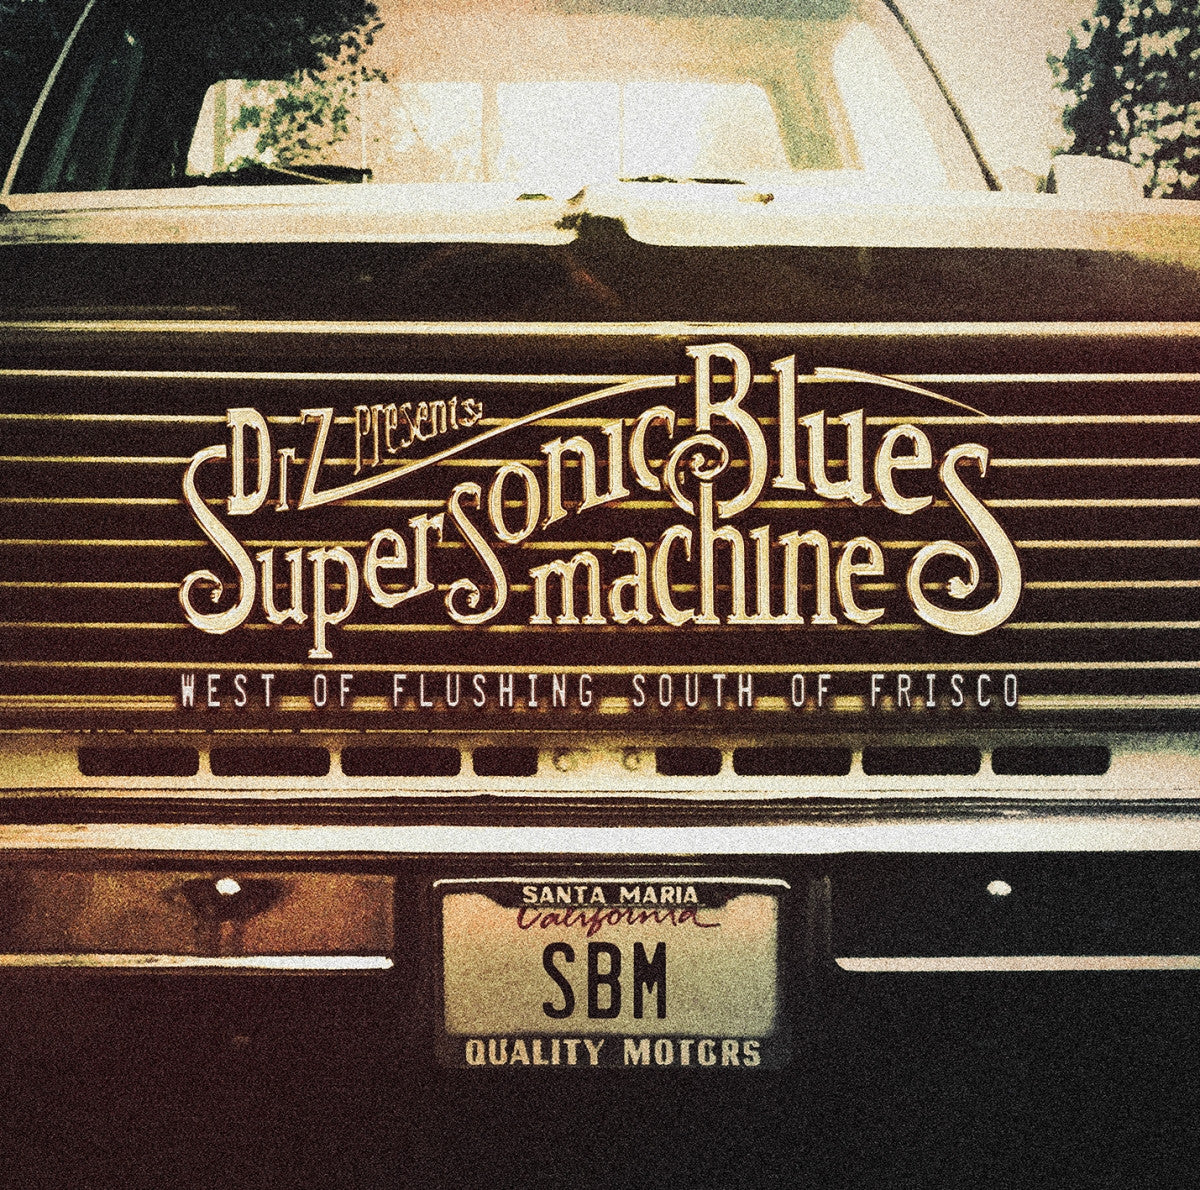 Supersonic Blues Machine - West Of Flushing, South Of Frisco (Vinyl 2 LP Record)